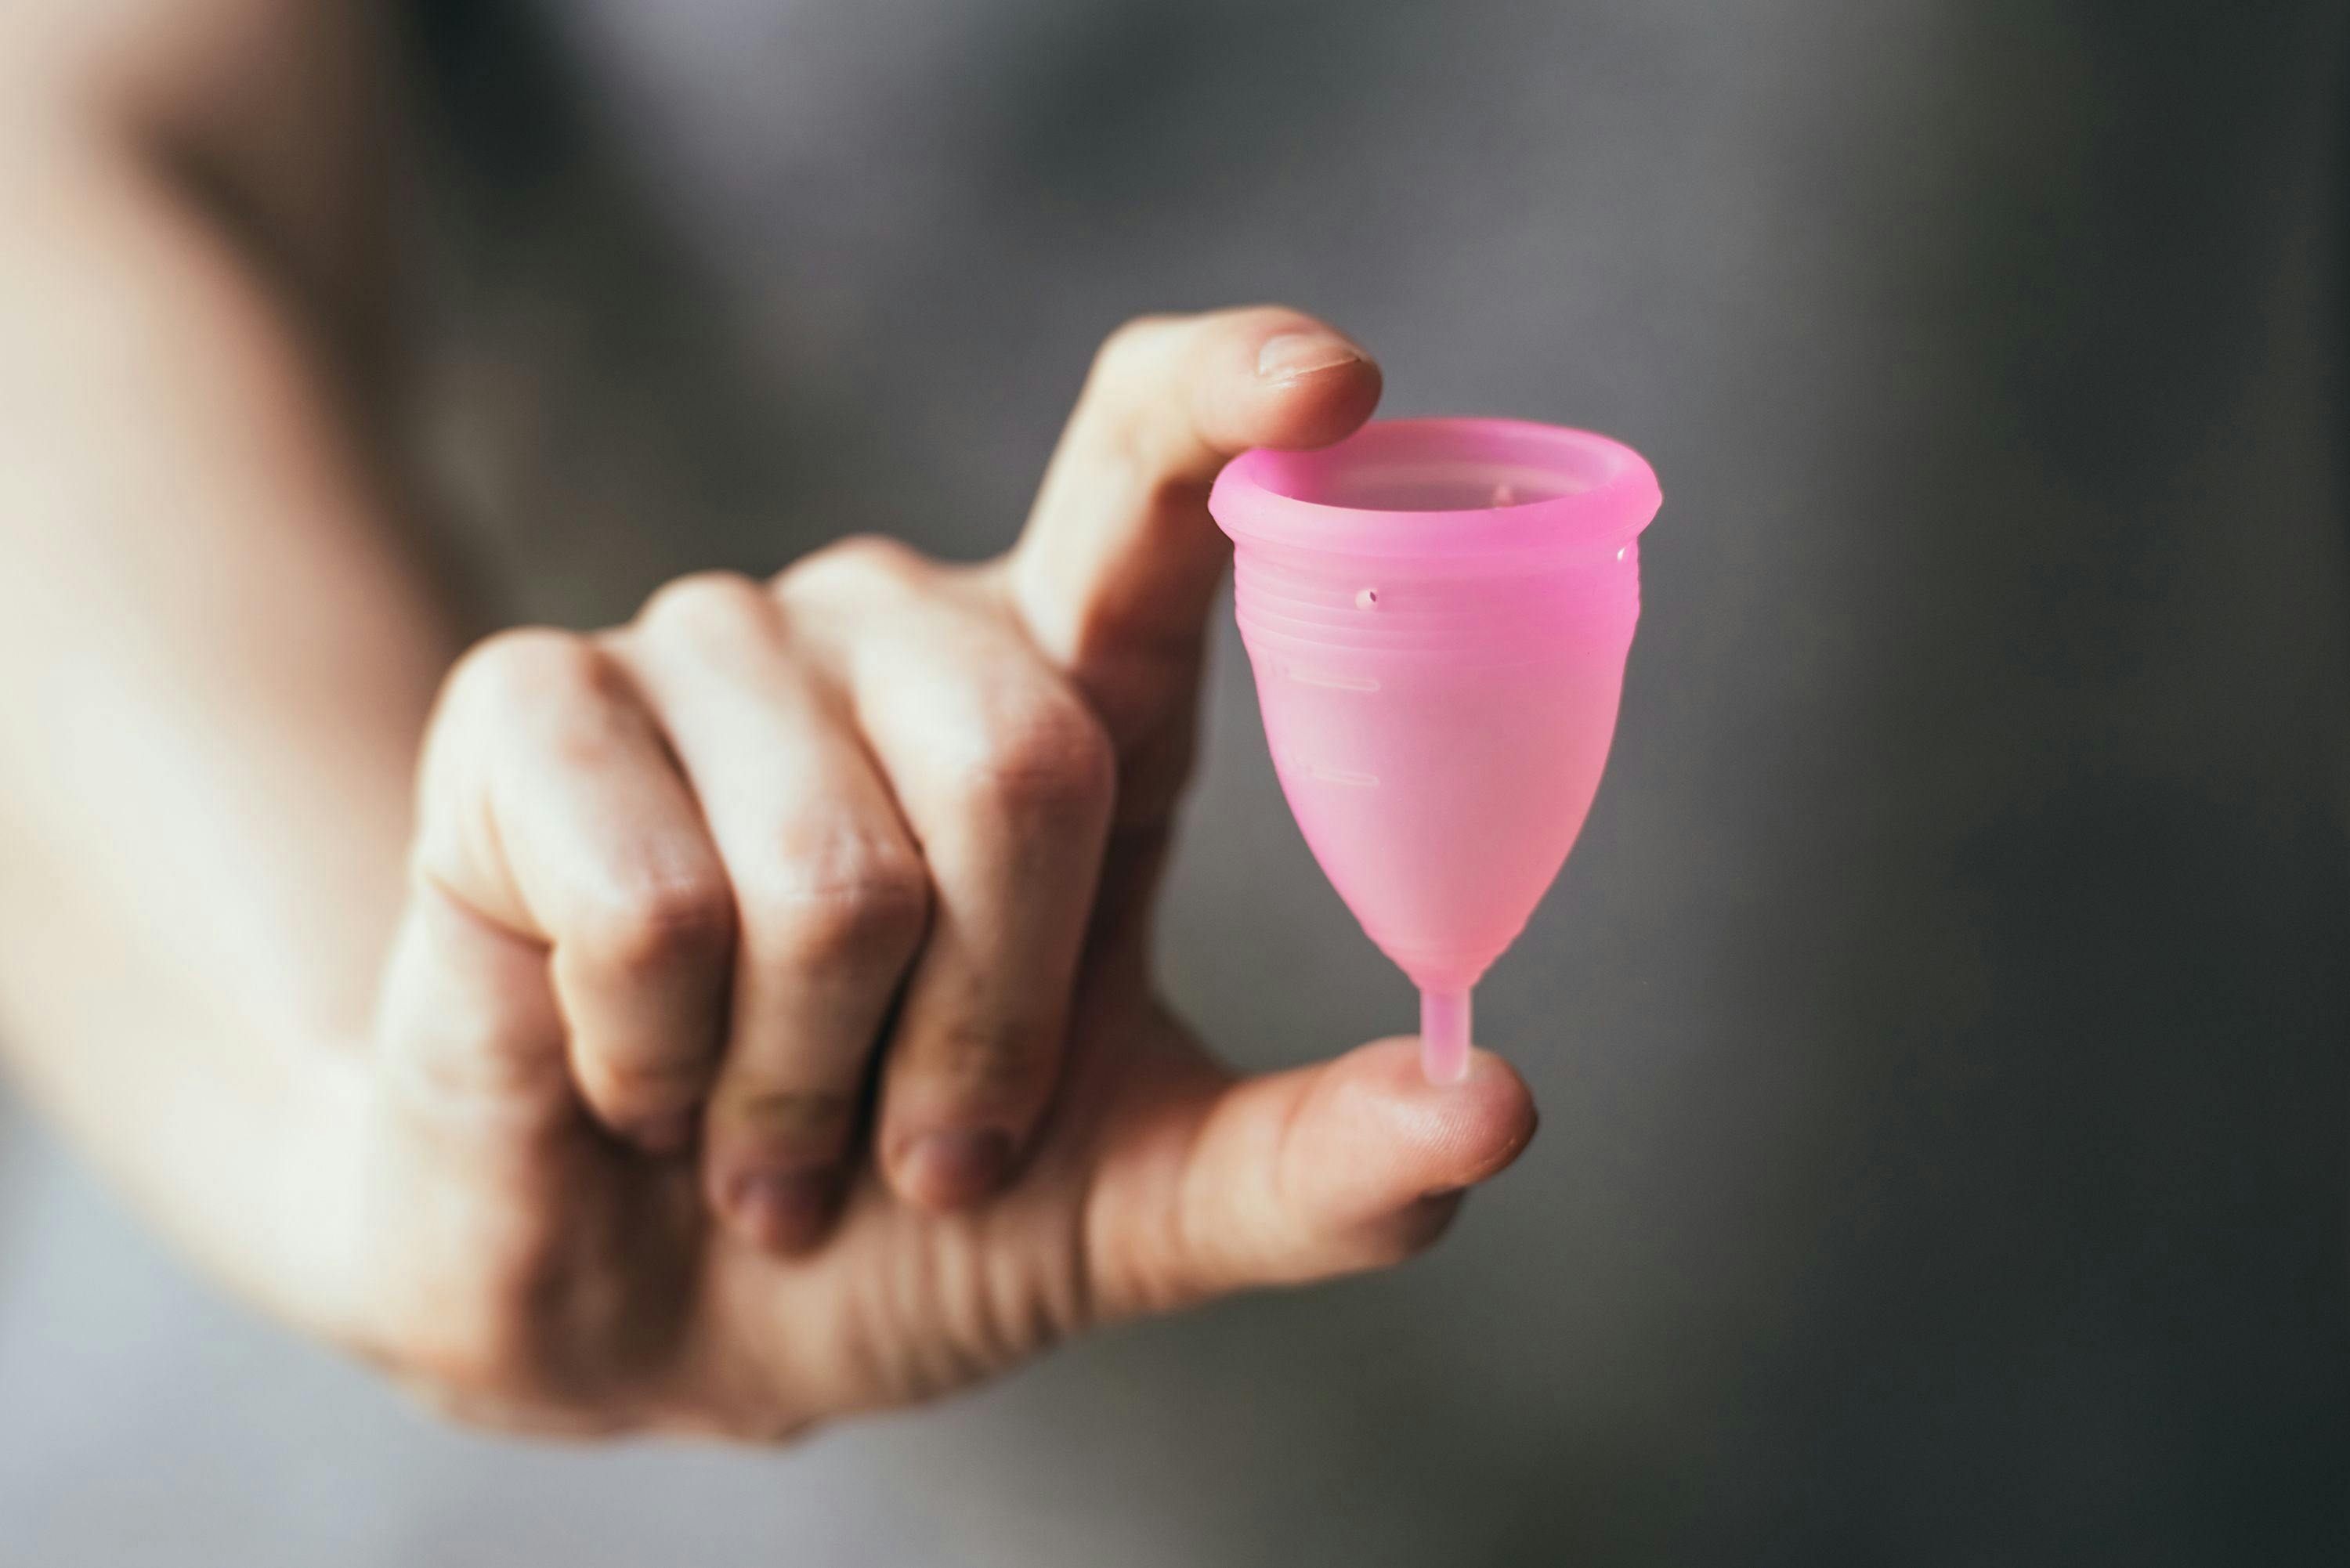 Menstrual cups: Why so little studied?